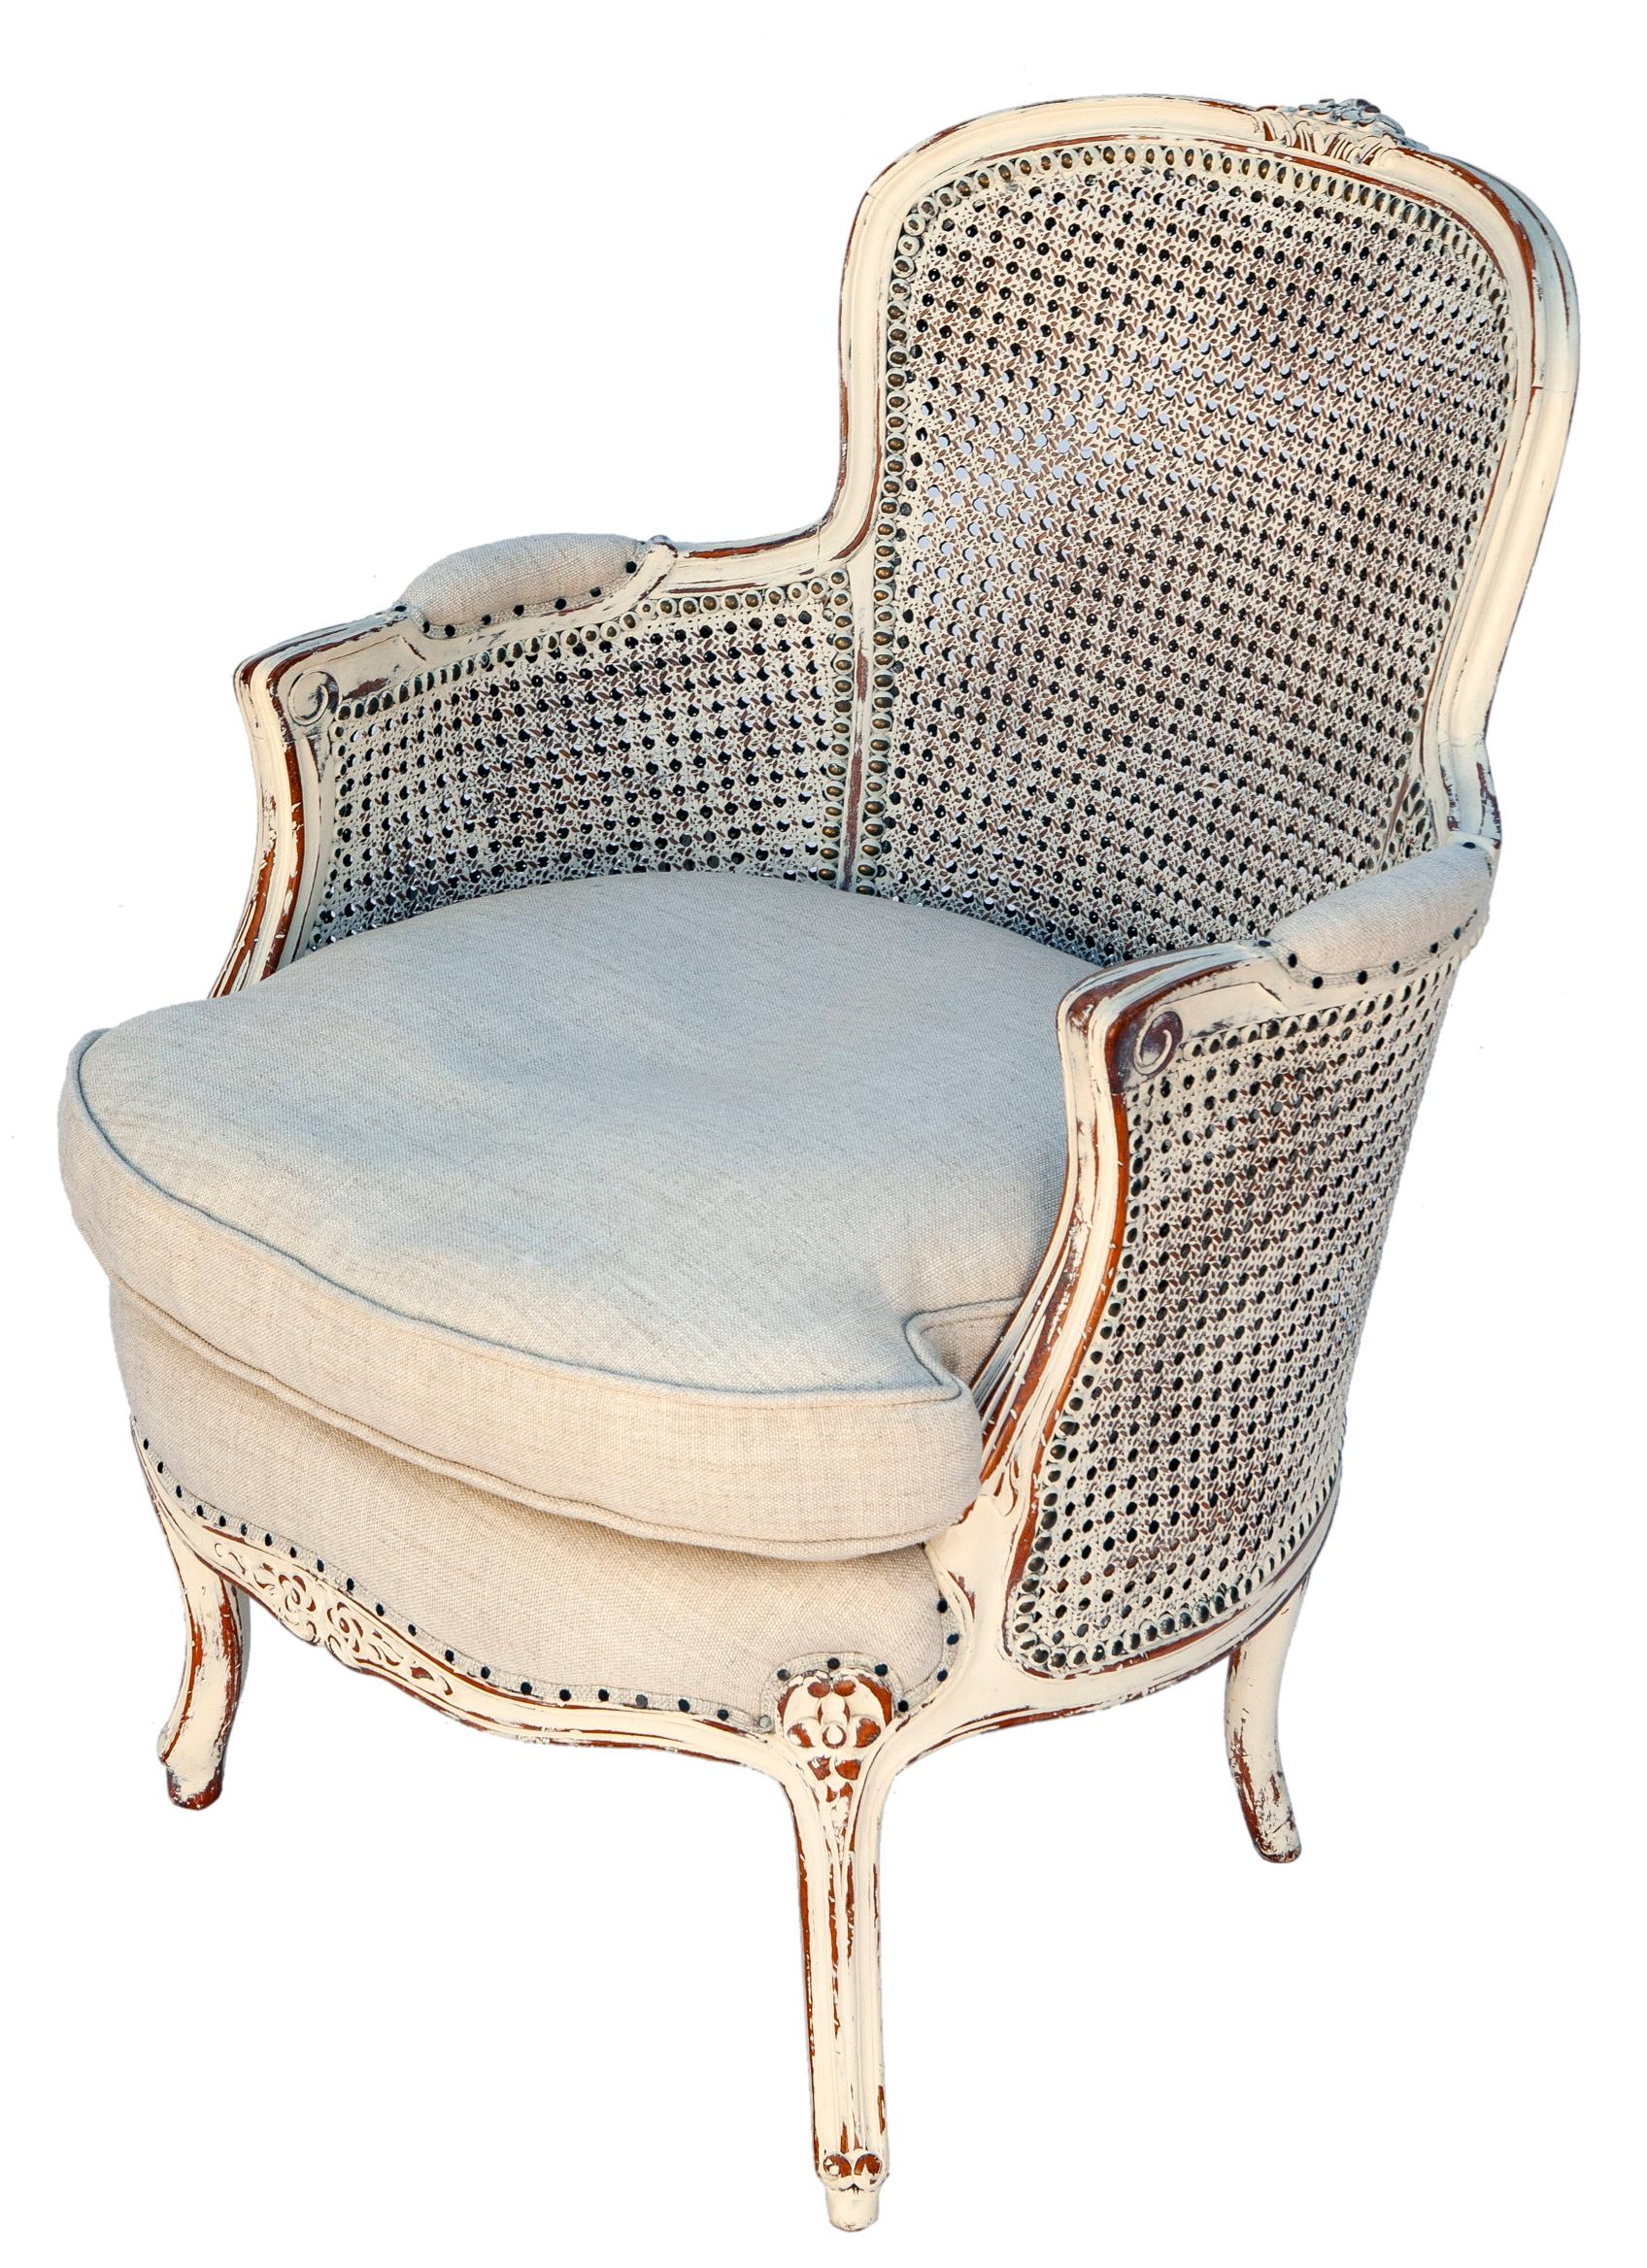 French Provincial Double-caned Hand-carved & Painted French Chair with New Linen Upholestry For Sale